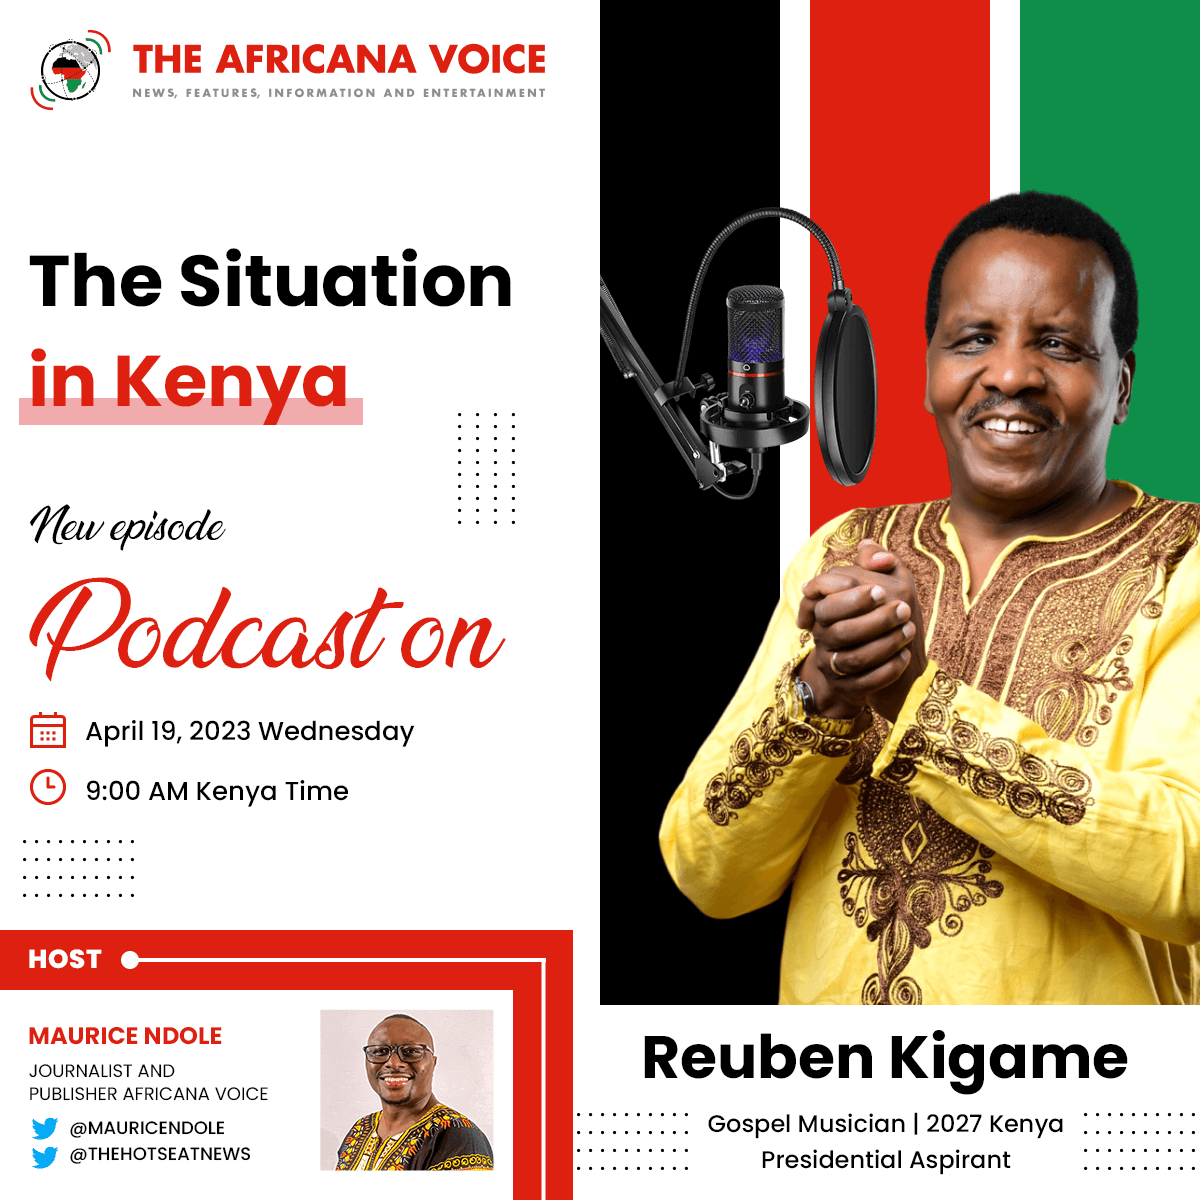 The Situation In Kenya With Reuben Kigame, 2027 Presidential Aspirant